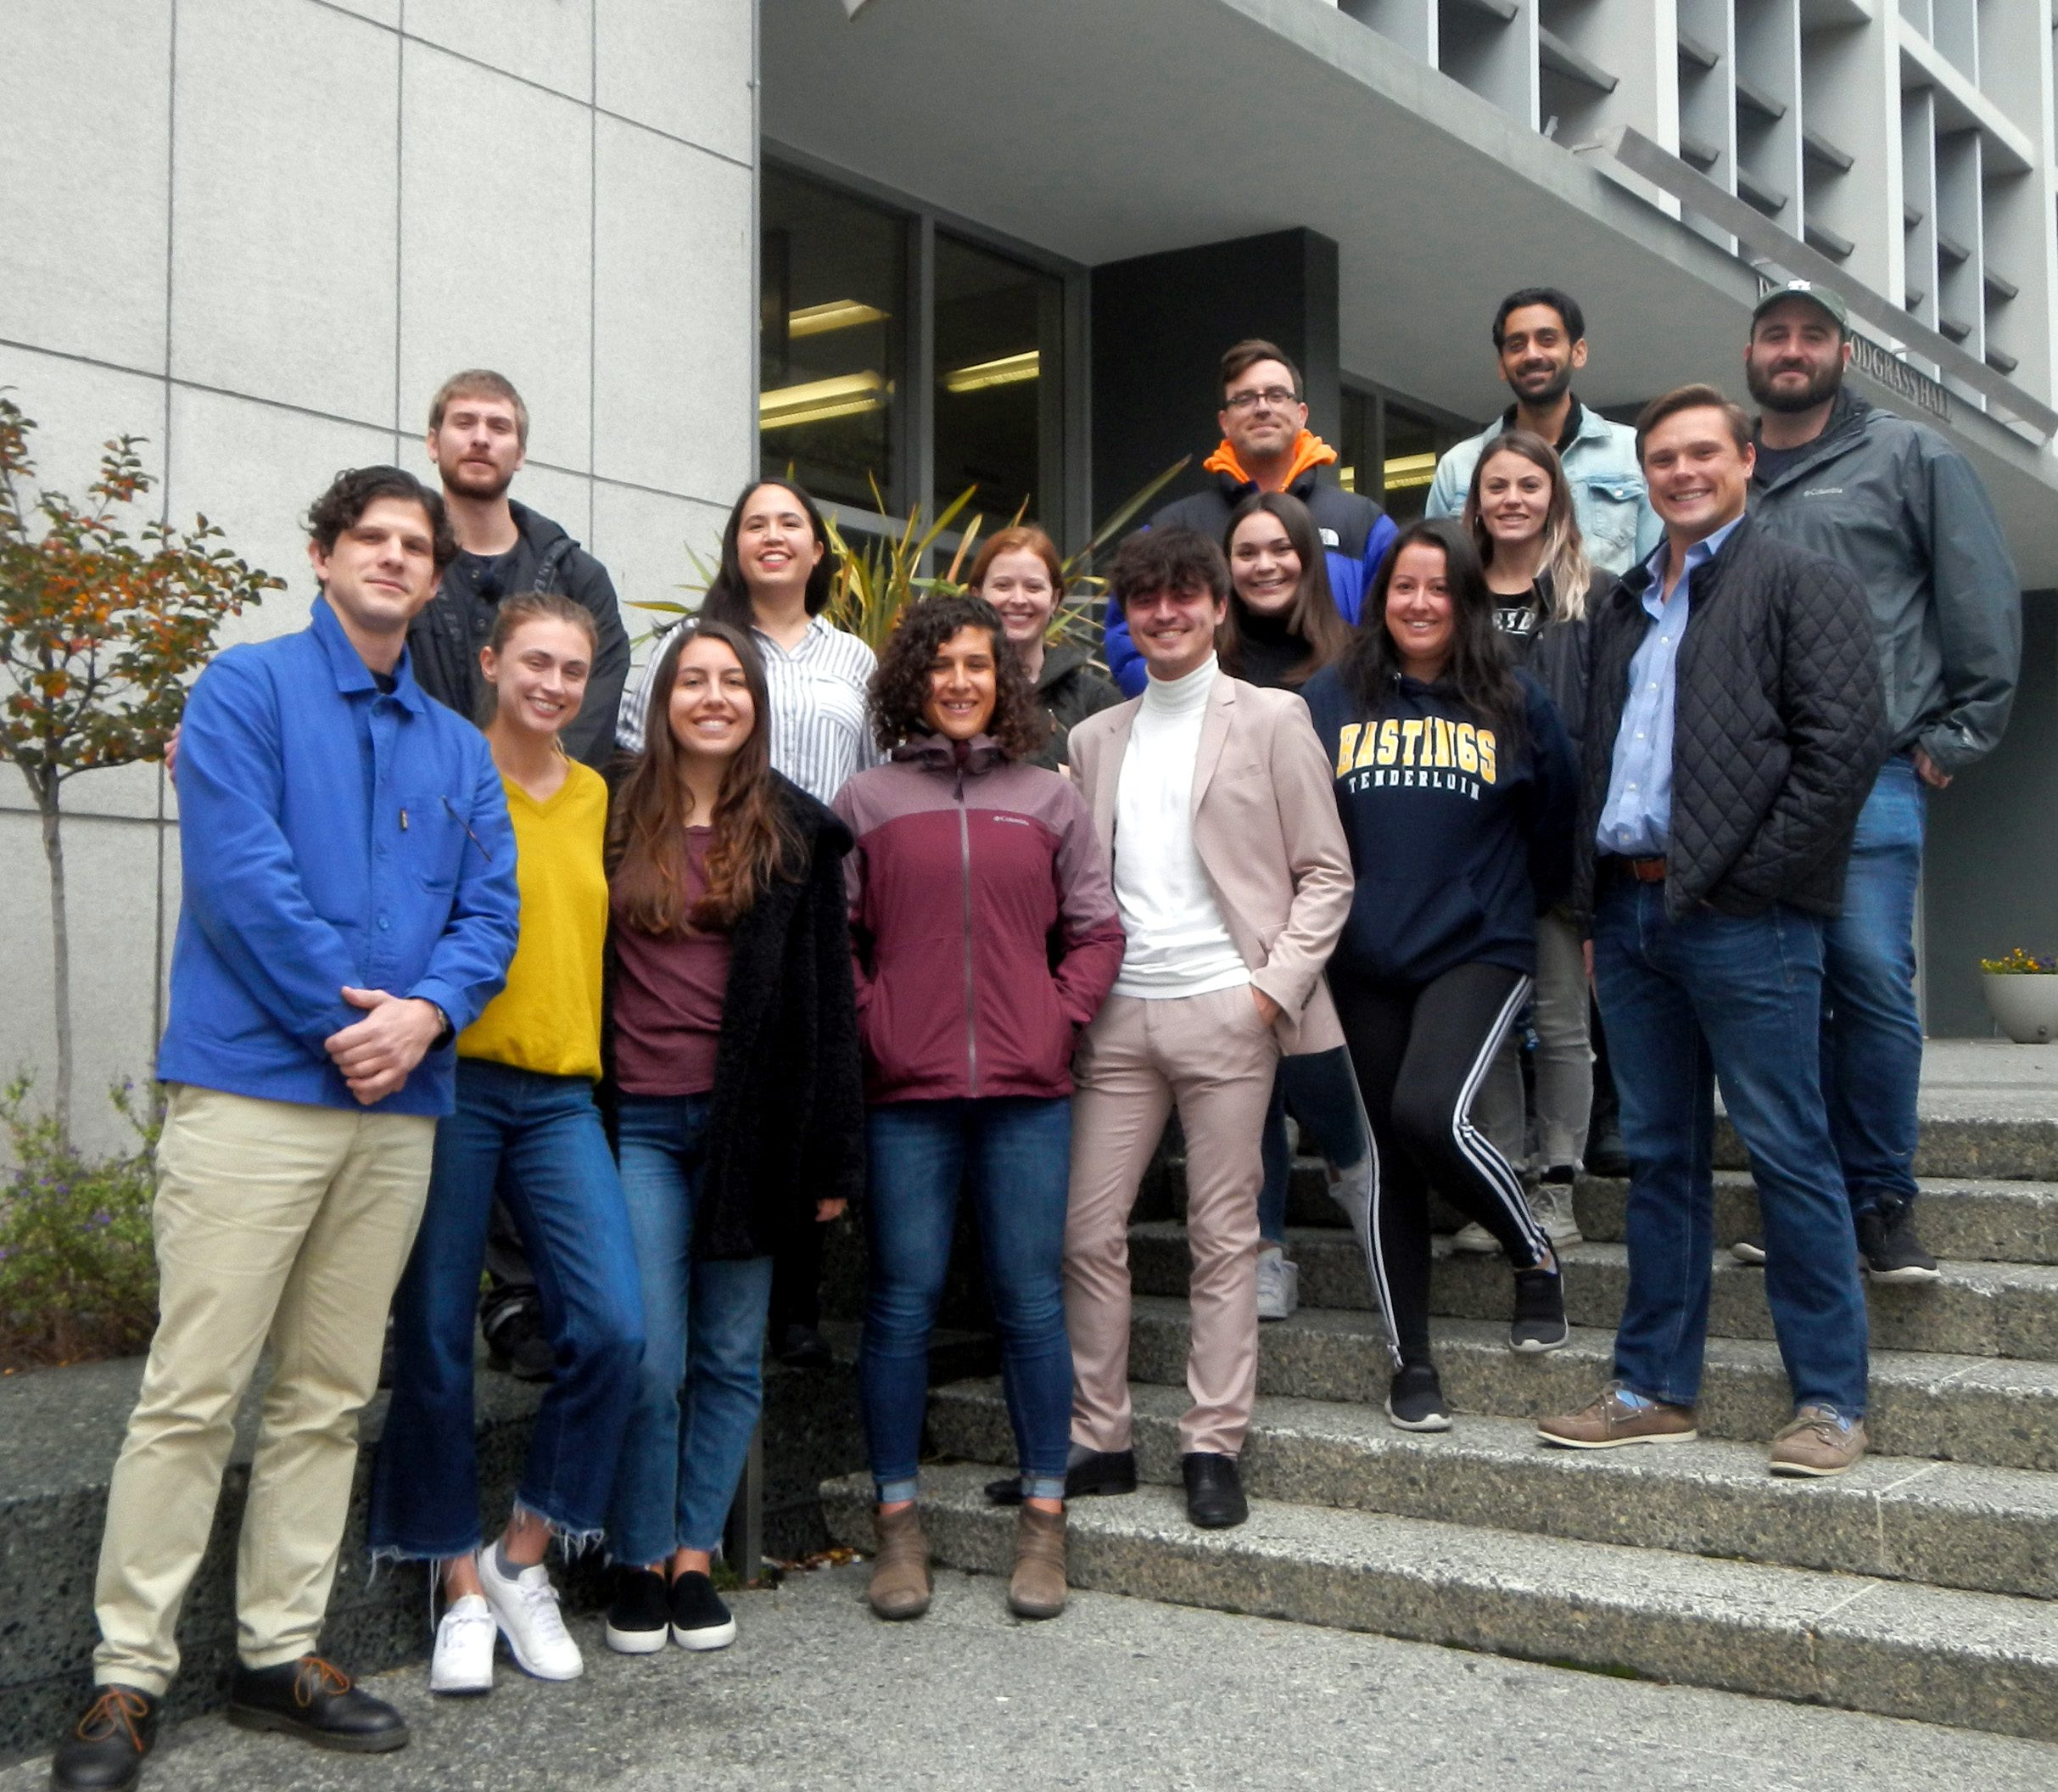 A group photo of the journal editors and staff standing in front of UC Law SF.